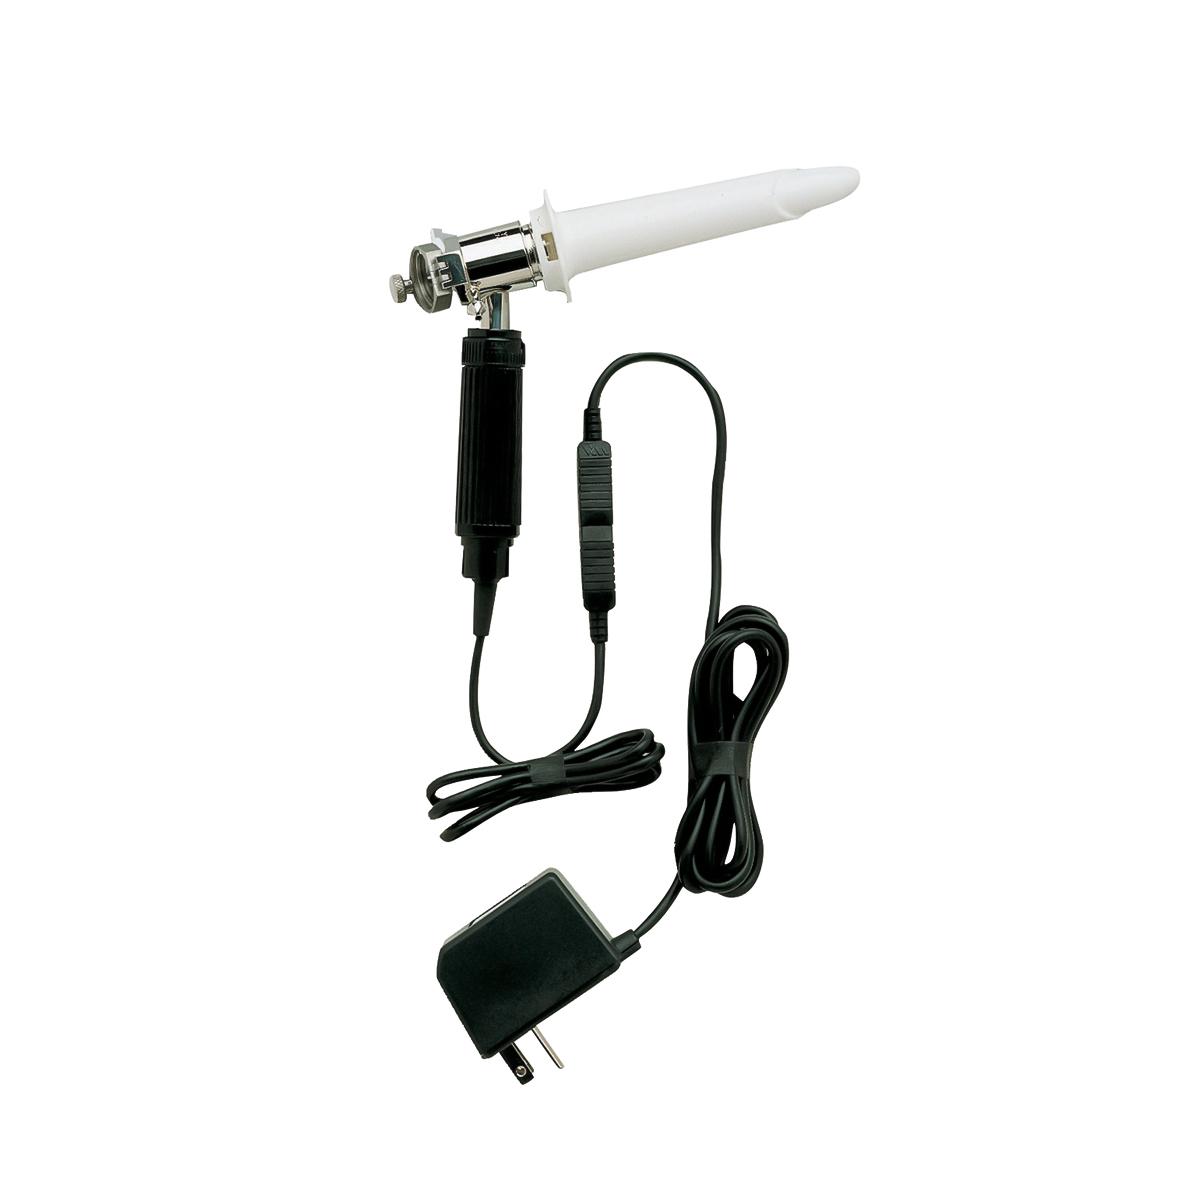 An anoscopy system with a white Welch Allyn Disposable Anoscope attached. The anoscope is tapered with a 45-degree bevel.